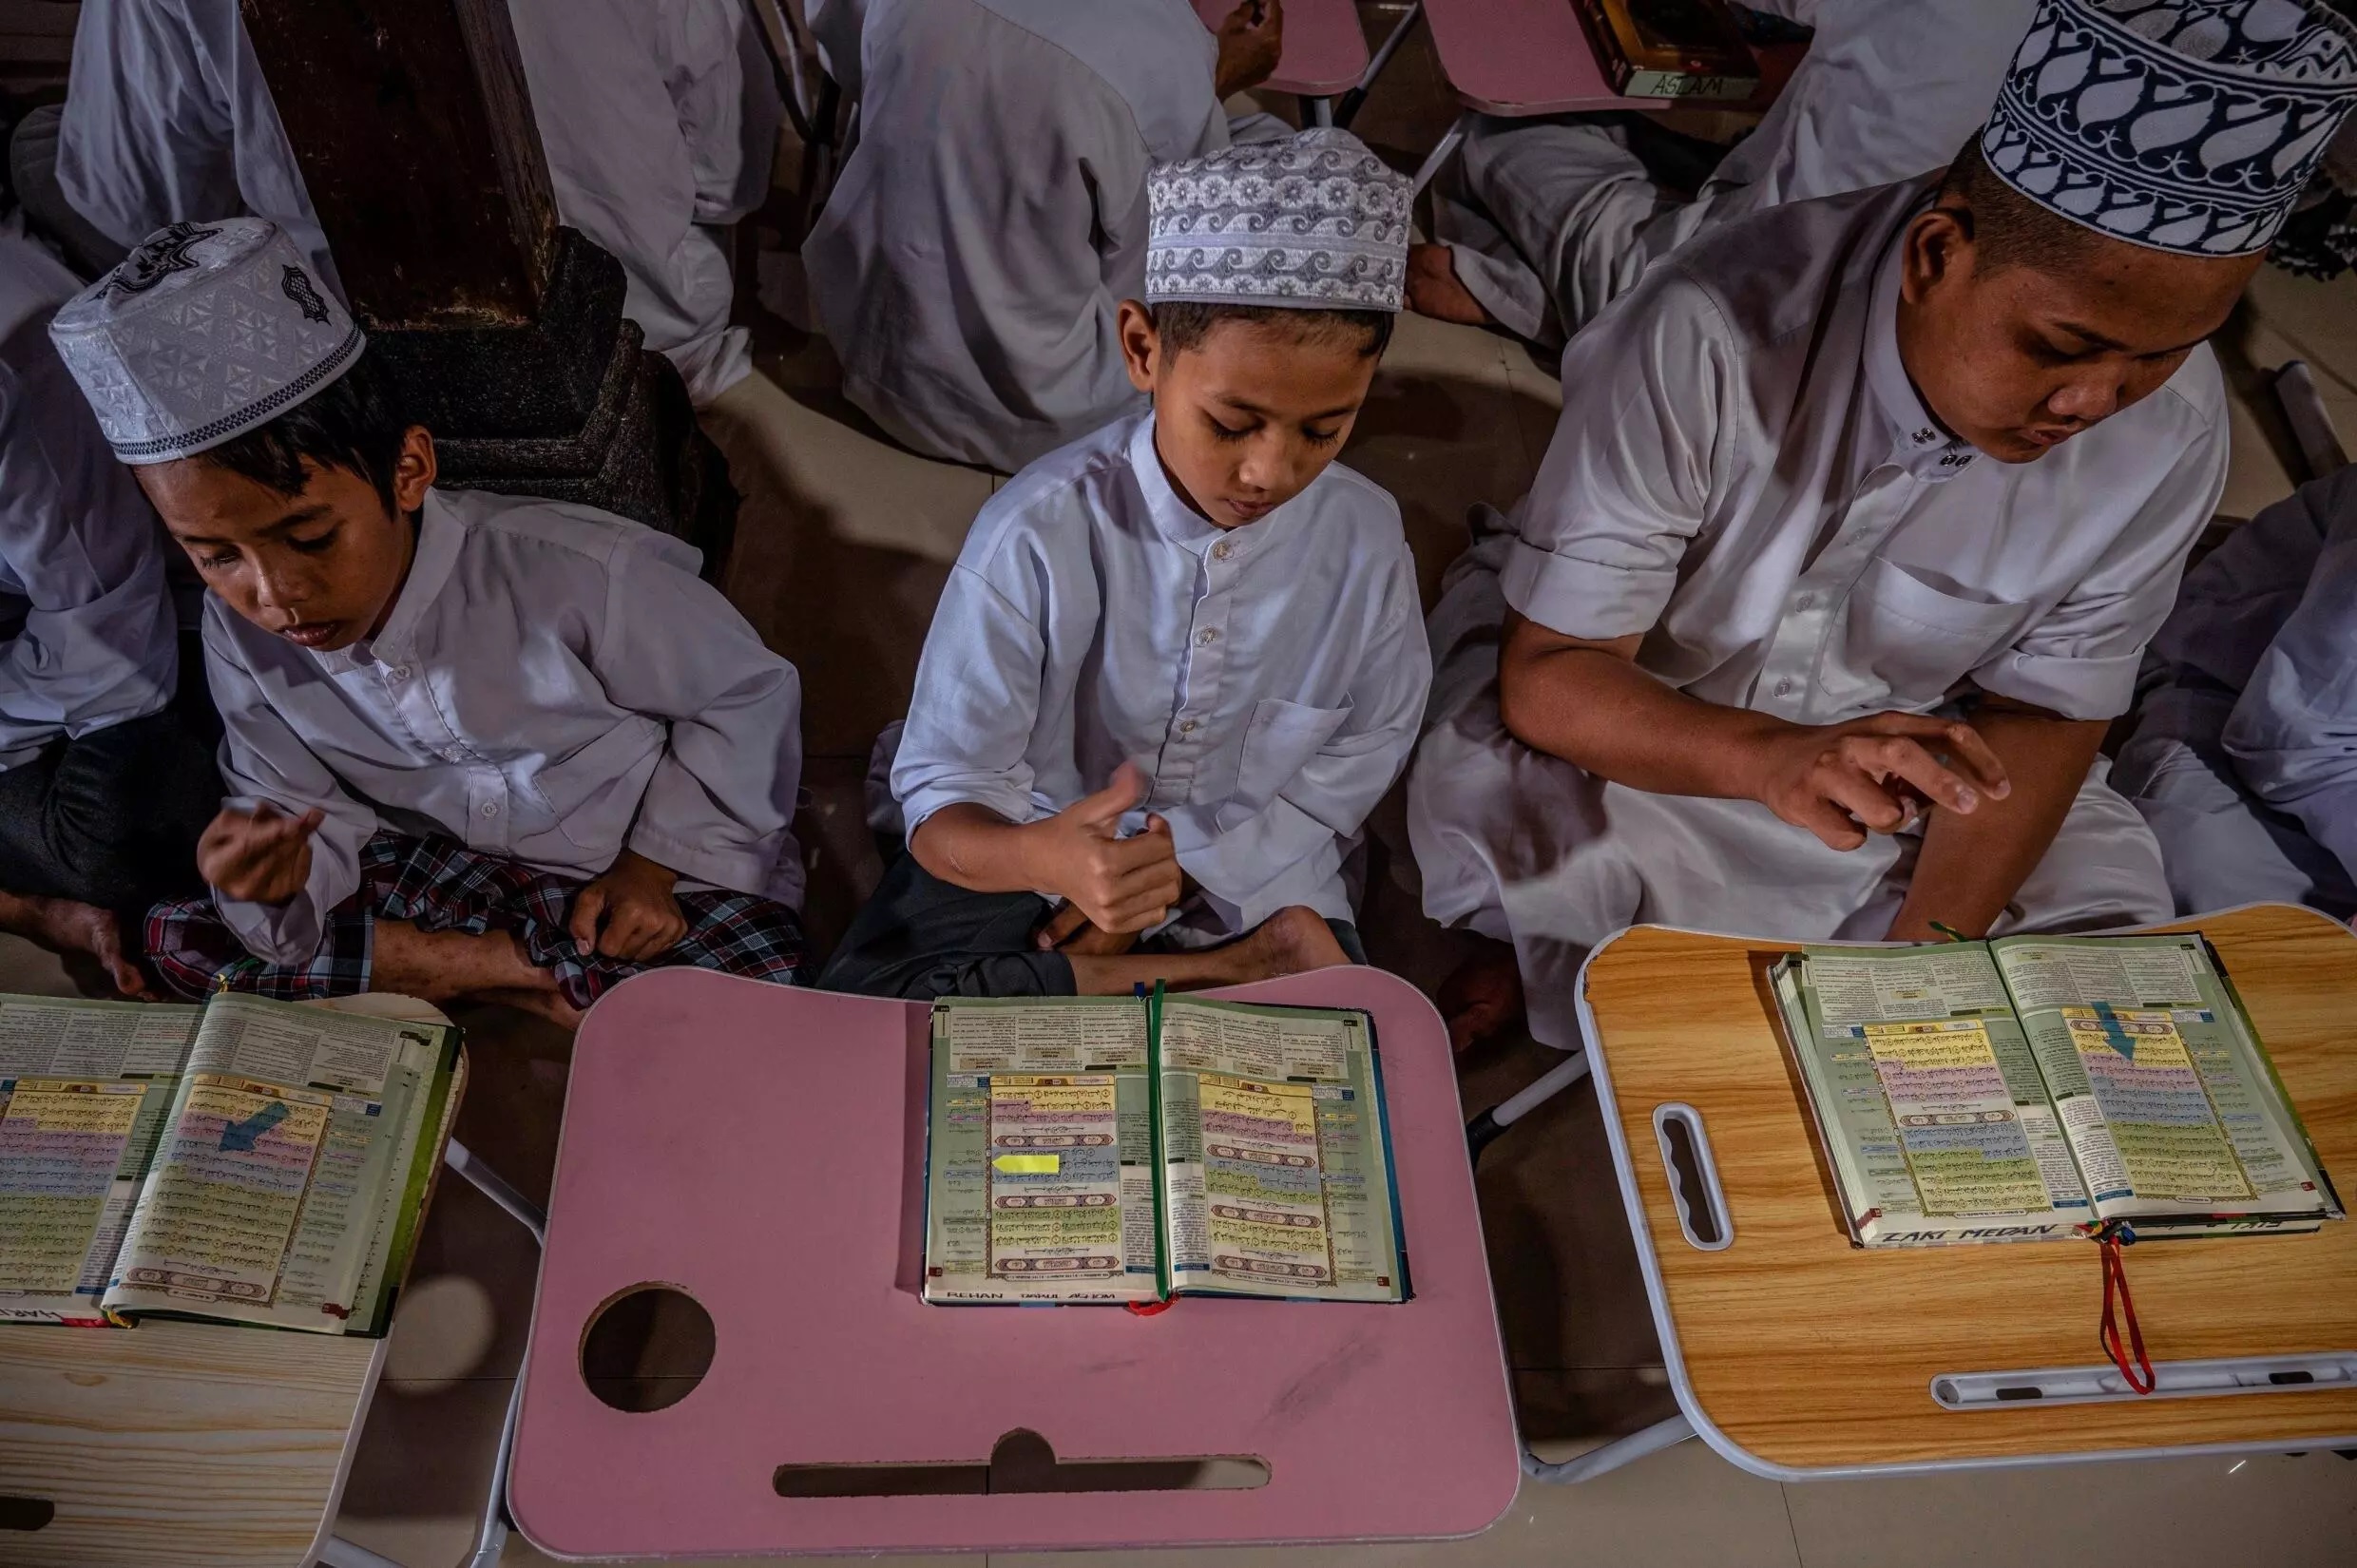 Students at the school also study mathematics, science and Islamic law in preparation for higher education elsewhere.—AFP